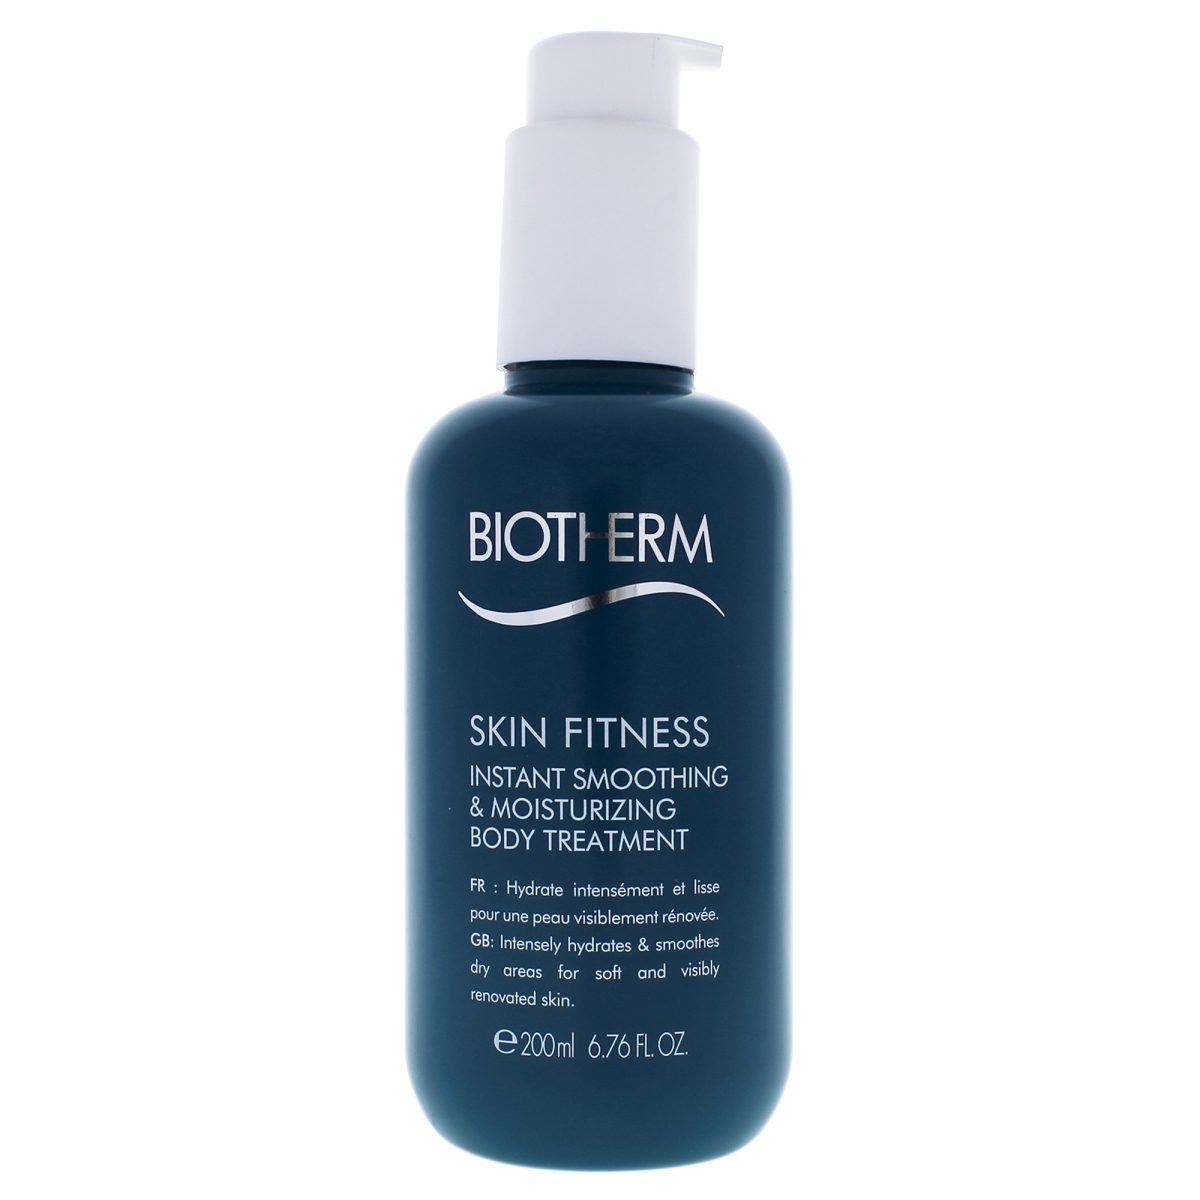 Picture of Biotherm I0089216 Skin Fitness Instant Smoothing & Moisturizing Body Treatment for Unisex - 6.76 oz